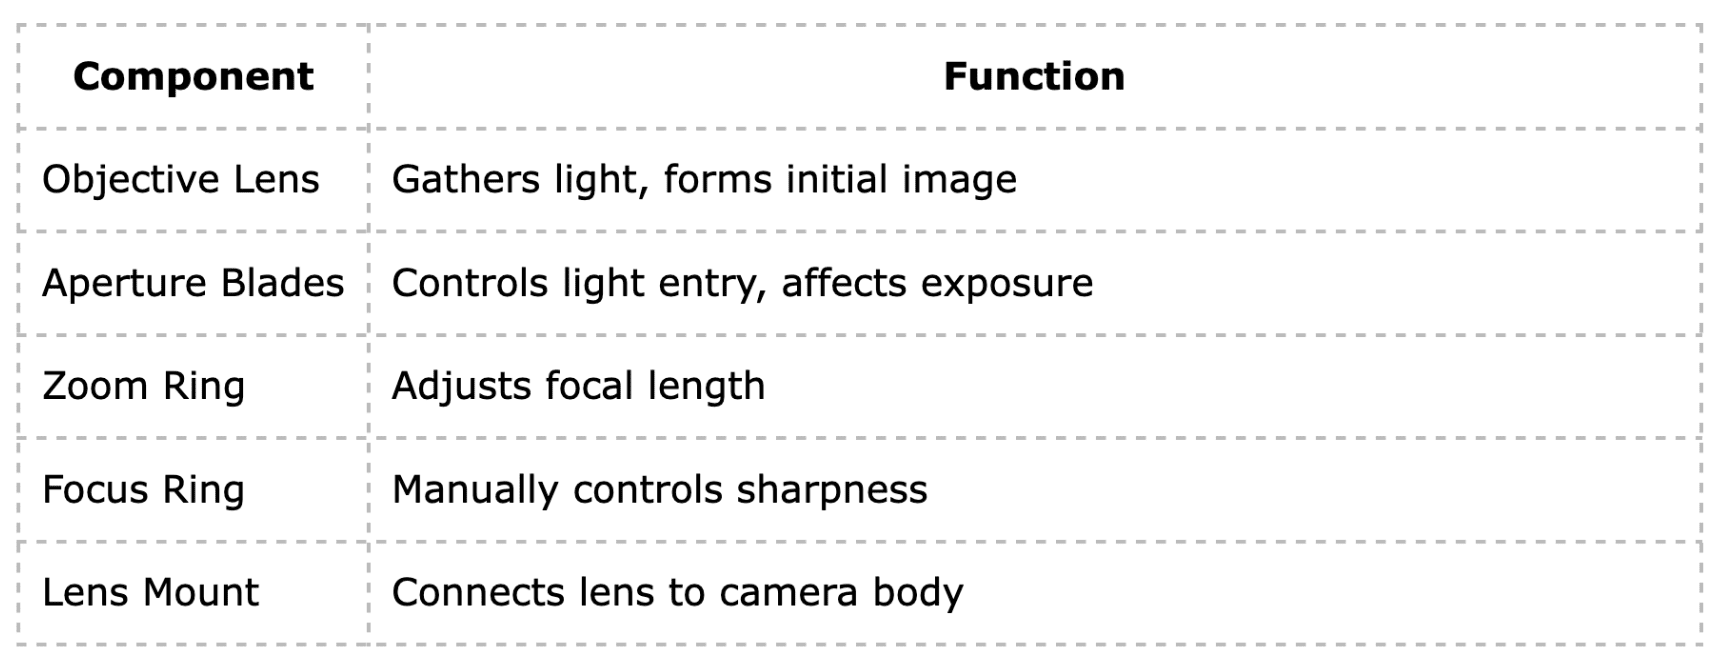 Understanding the Components of a Camera Lens: A Rafcamera Perspective